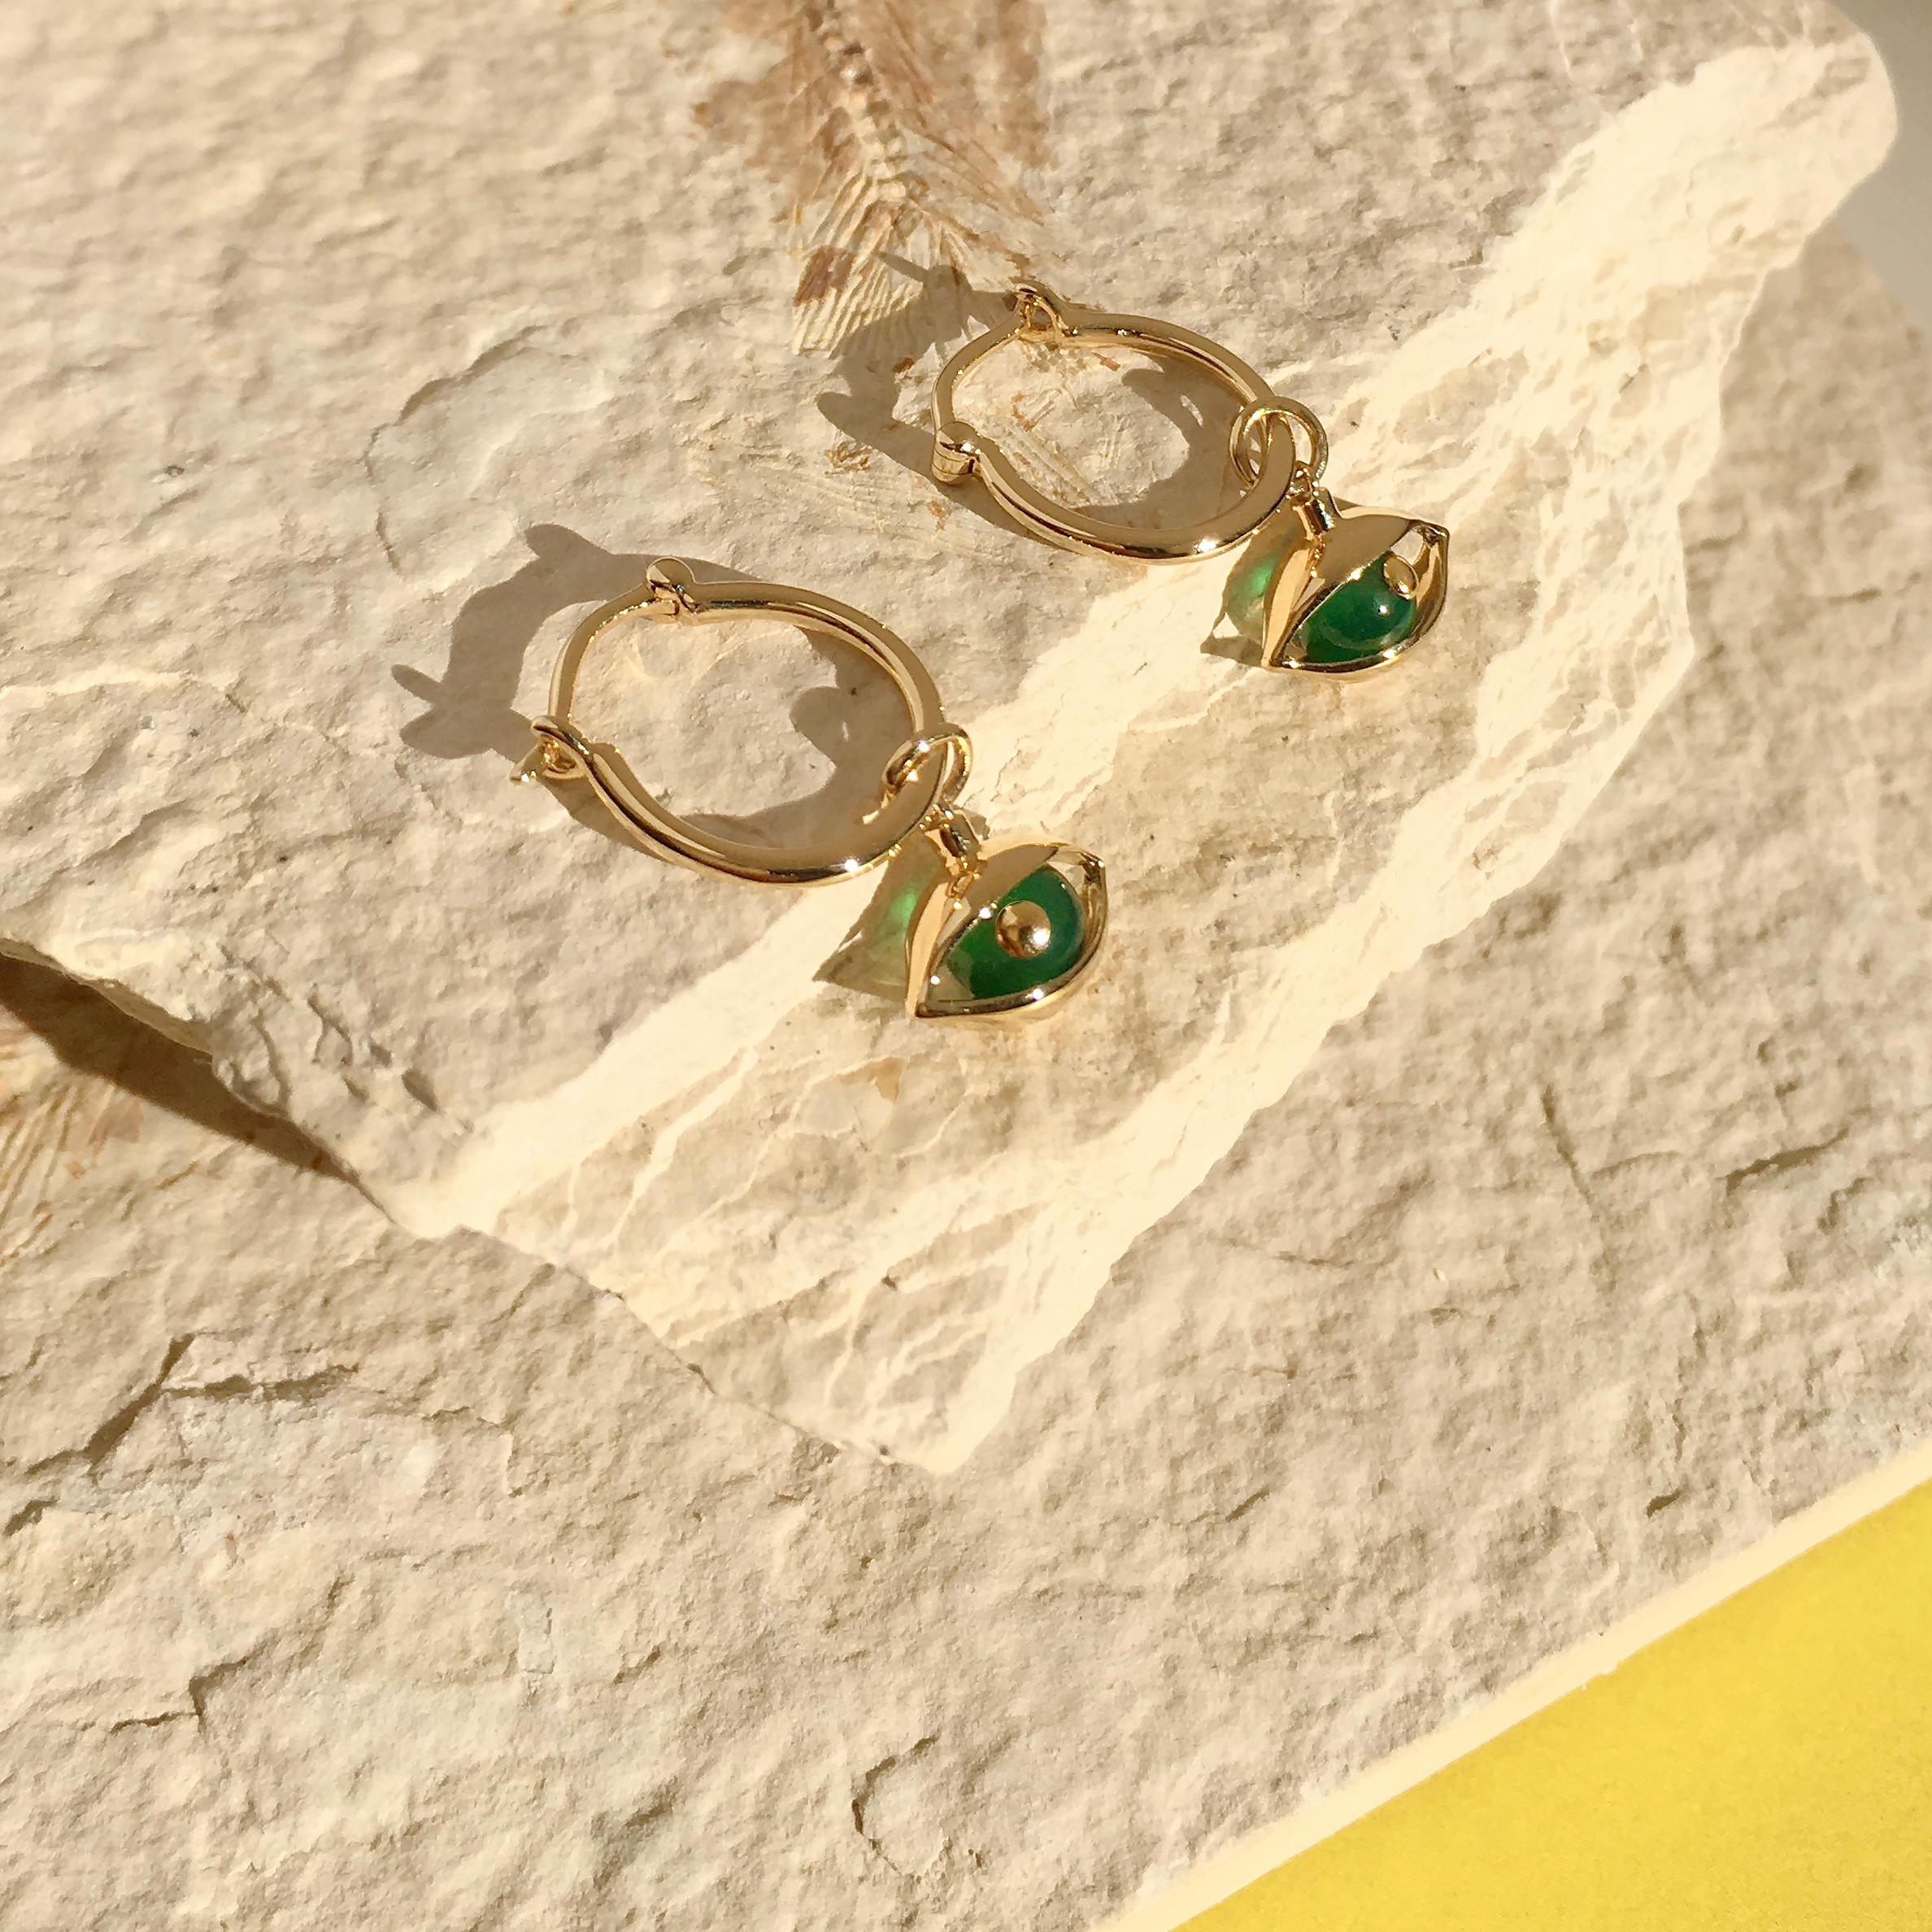 This very unique eye mini hoop earrings from The Eye collection, it's a perfect everyday talisman, elegant and stylish.  The Eye collection, showcases this award winning, fine jewellery designer’s extraordinary talent to work with shapes, materials,